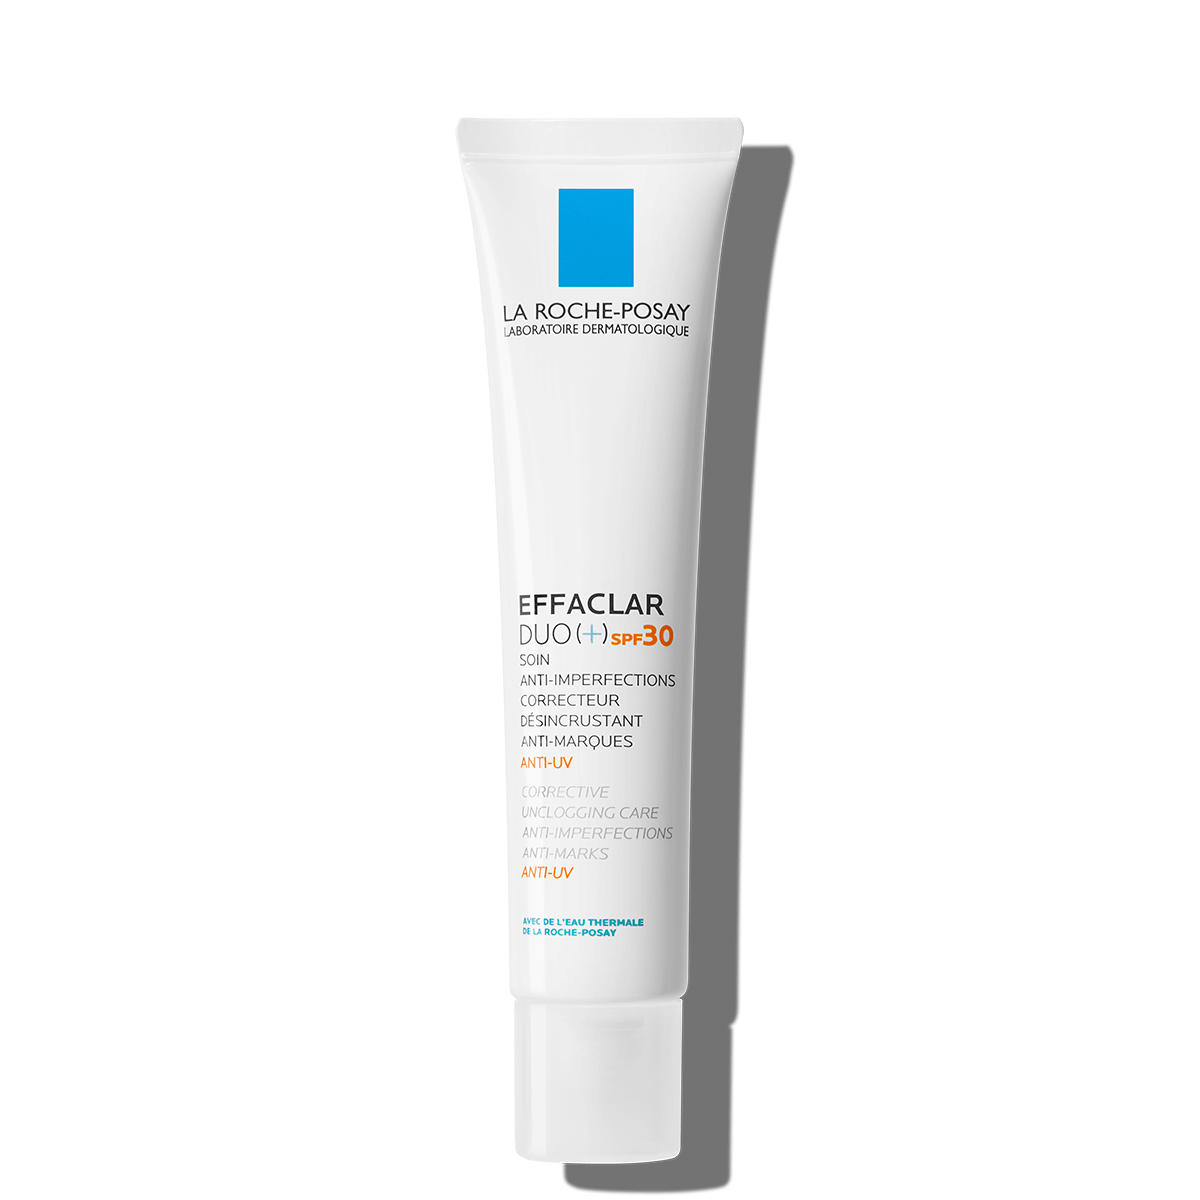 La Roche-Posay Effaclar Duo Plus SPF 30, a pimple cream with UV protection for men and women